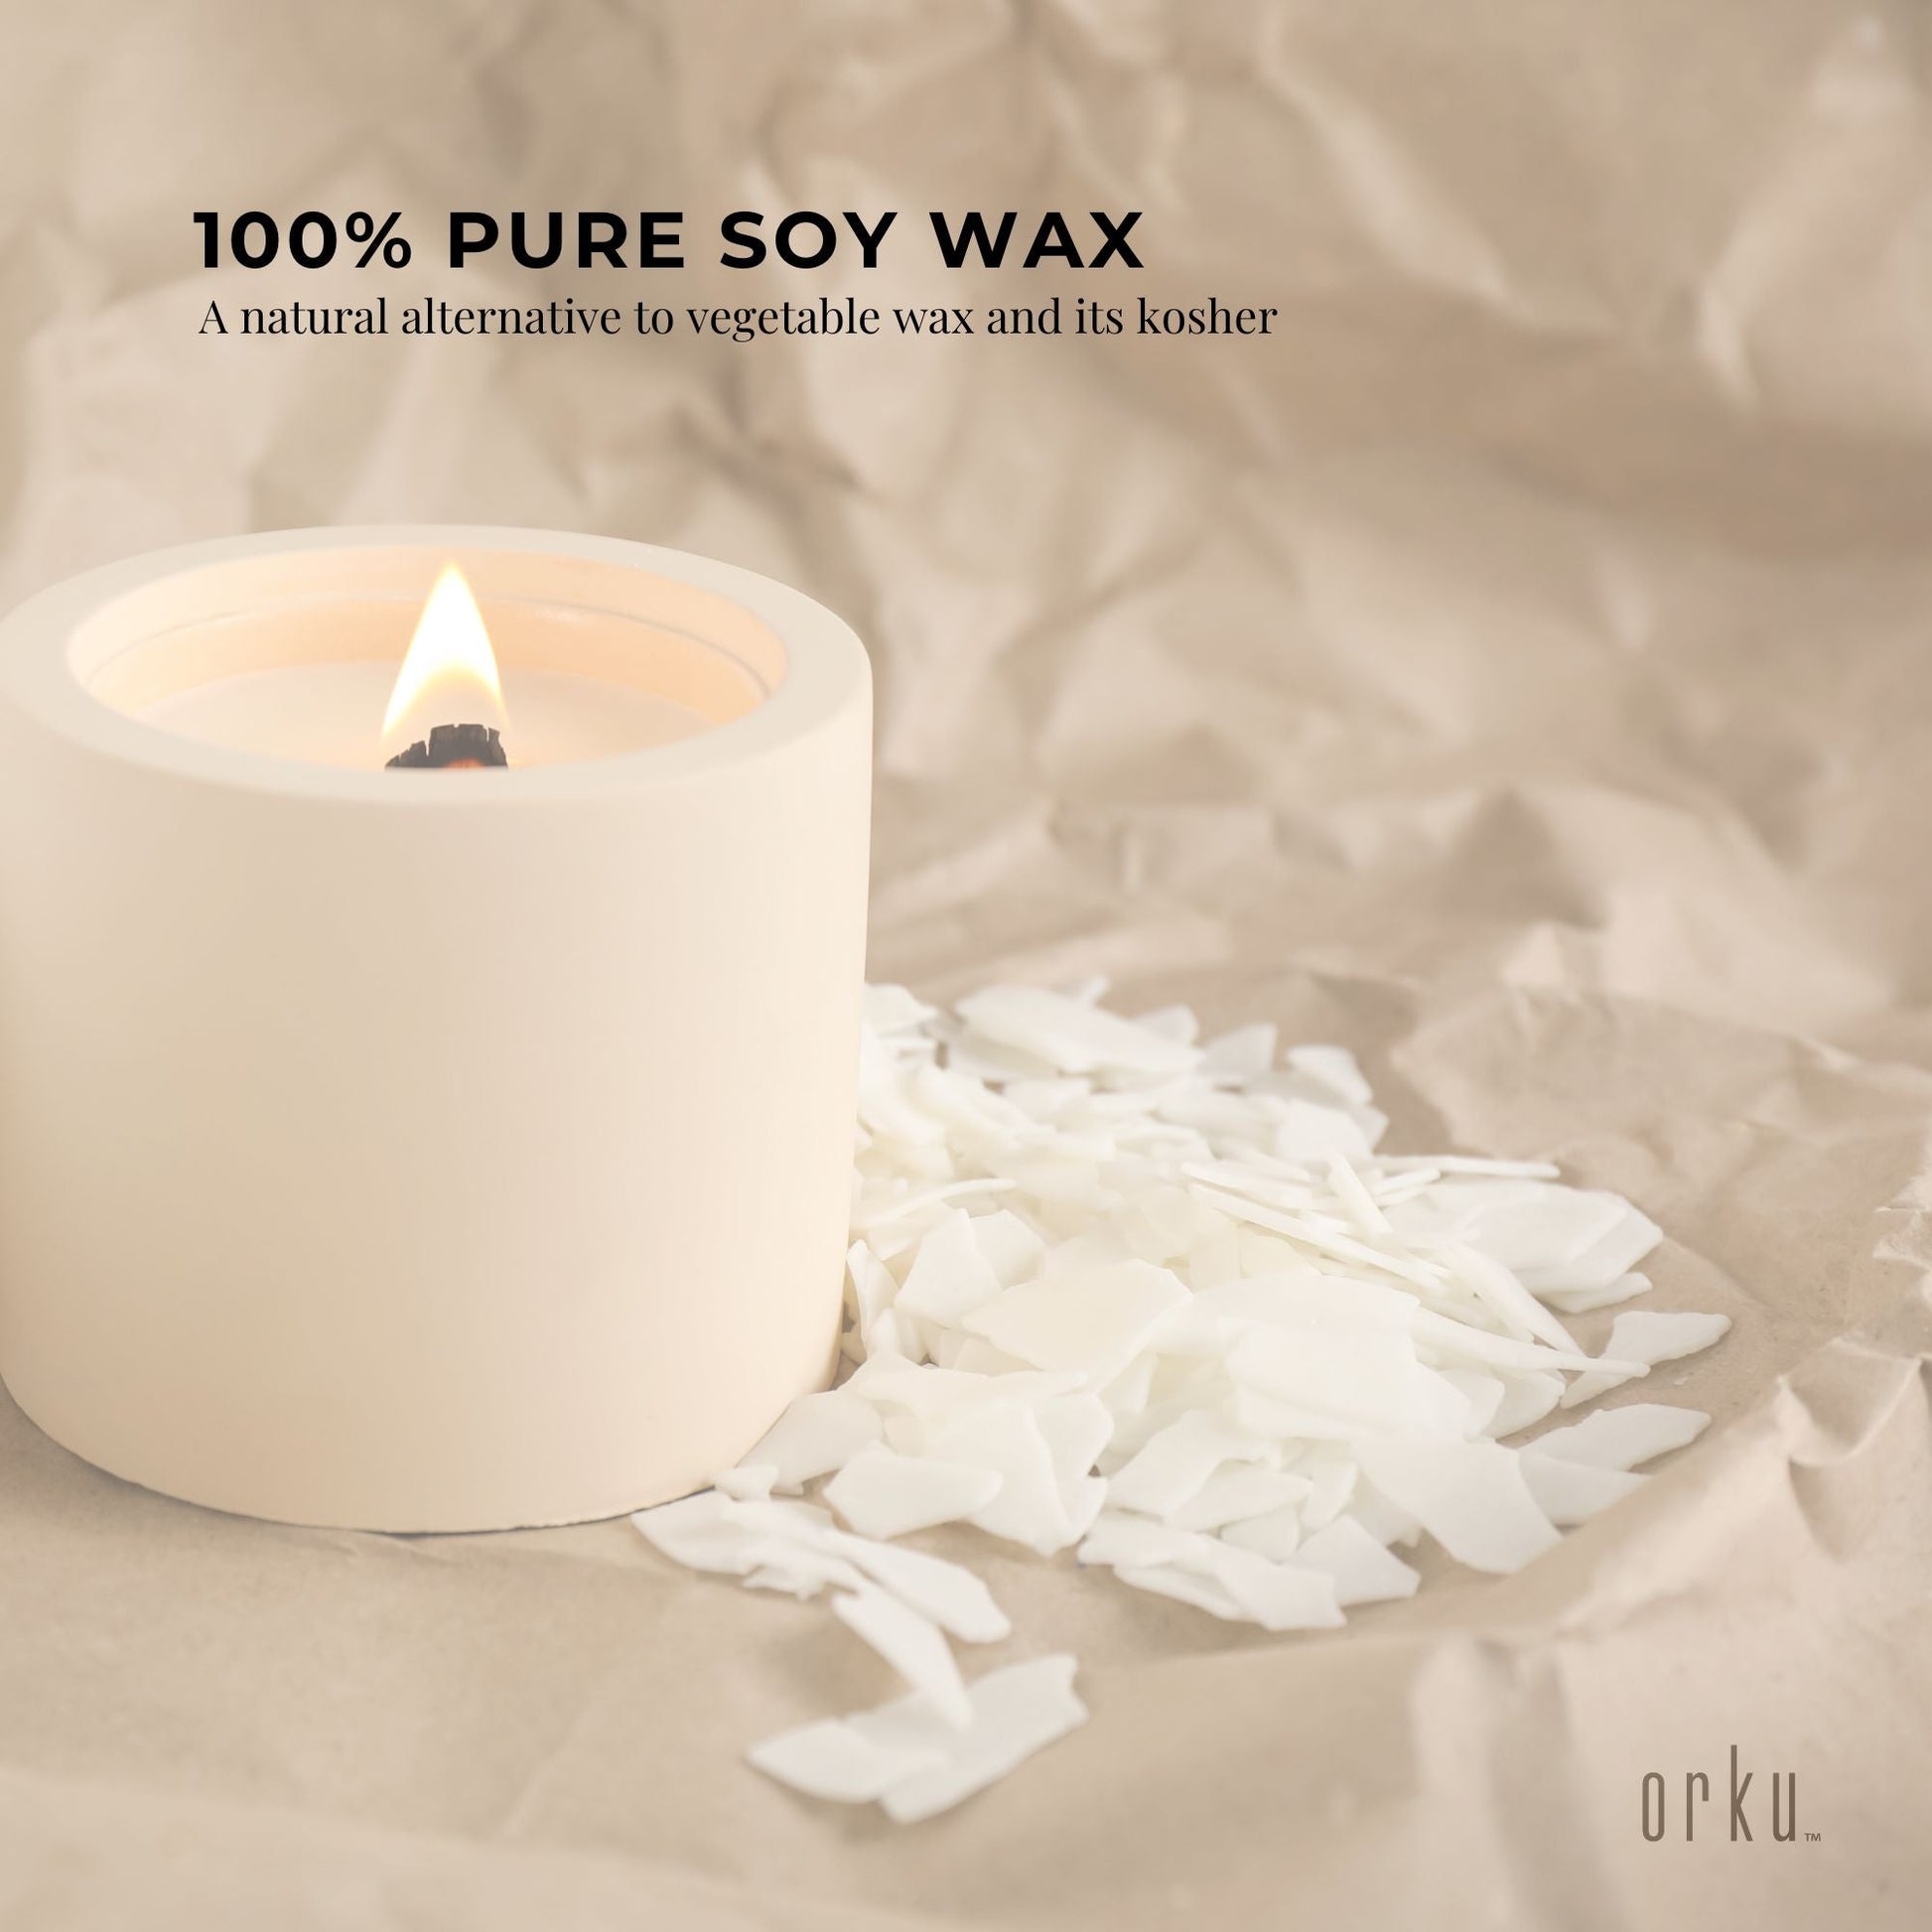 50g Golden 464 Soy Wax Flakes - 100% Pure Natural DIY Candle Melts Chips